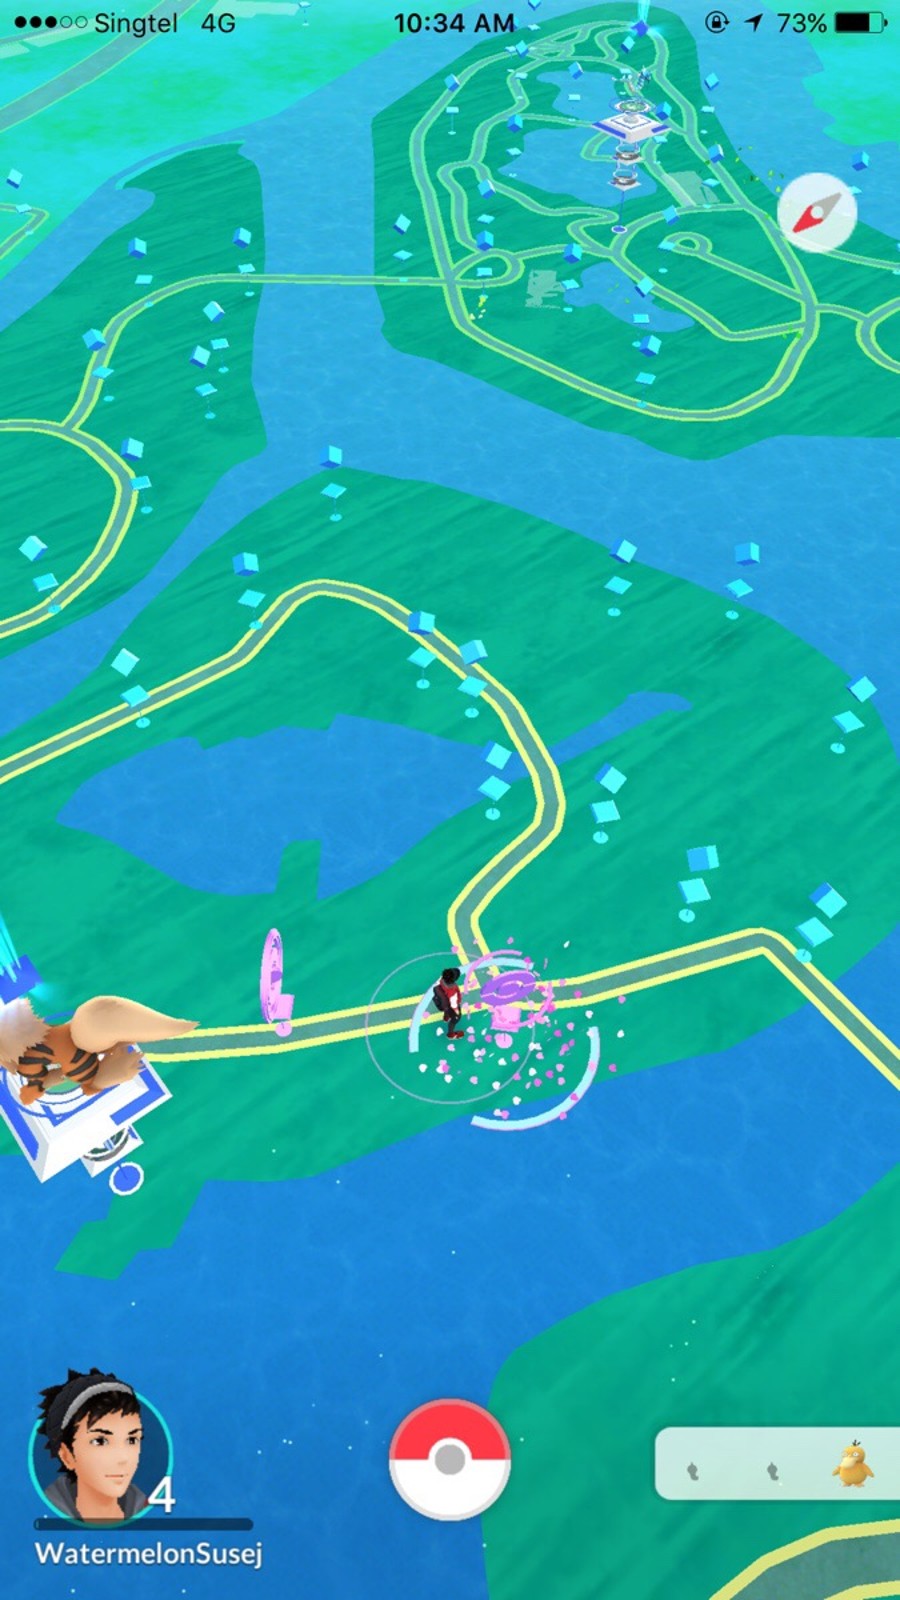 13 Best Places In Singapore To Farm Pokestops And Catch Pokemon